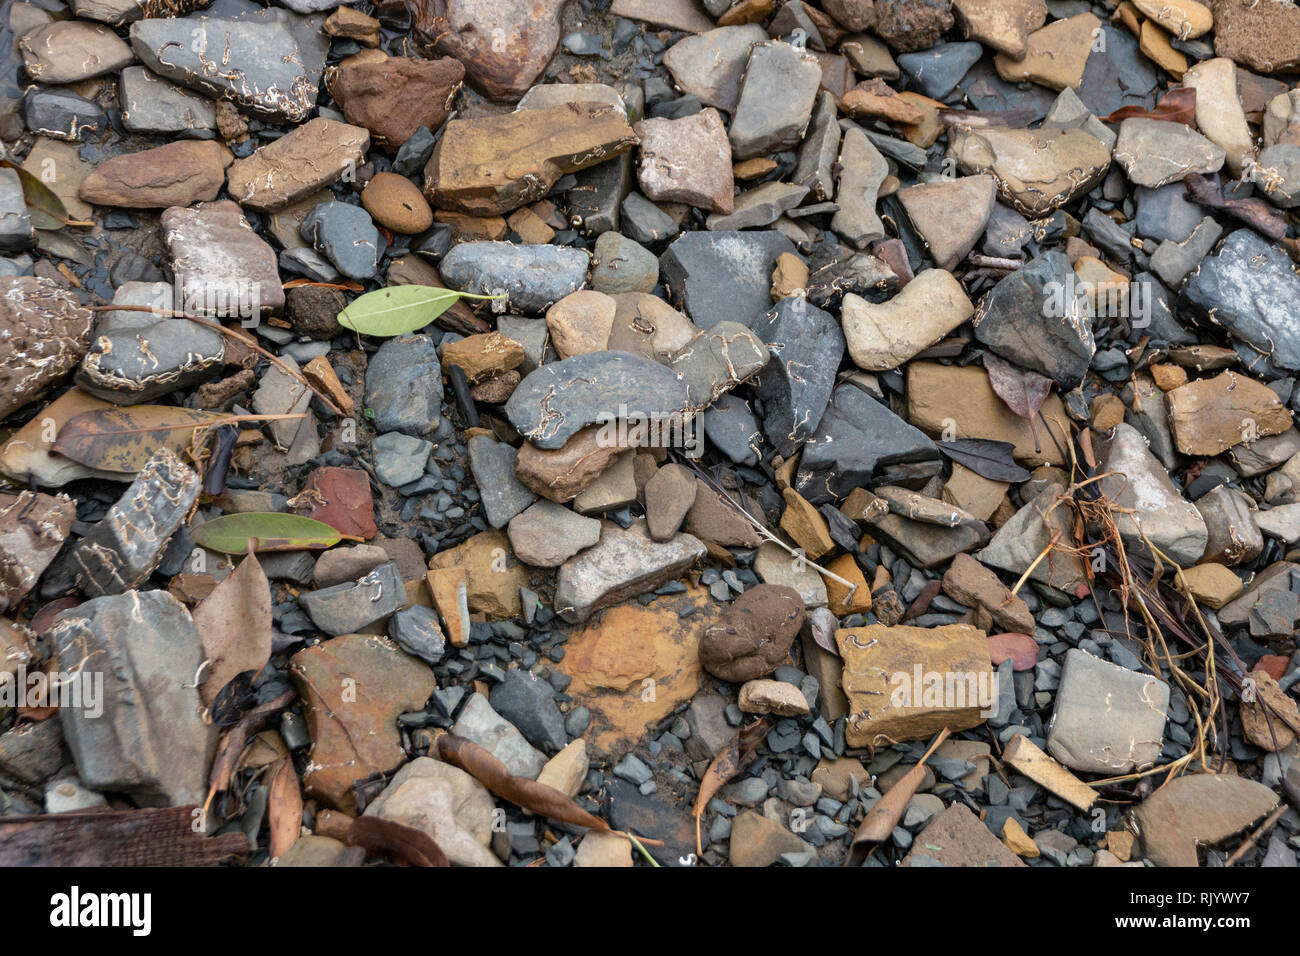 A close up view of rock, stones and plant matter next to a river bank Stock Photo